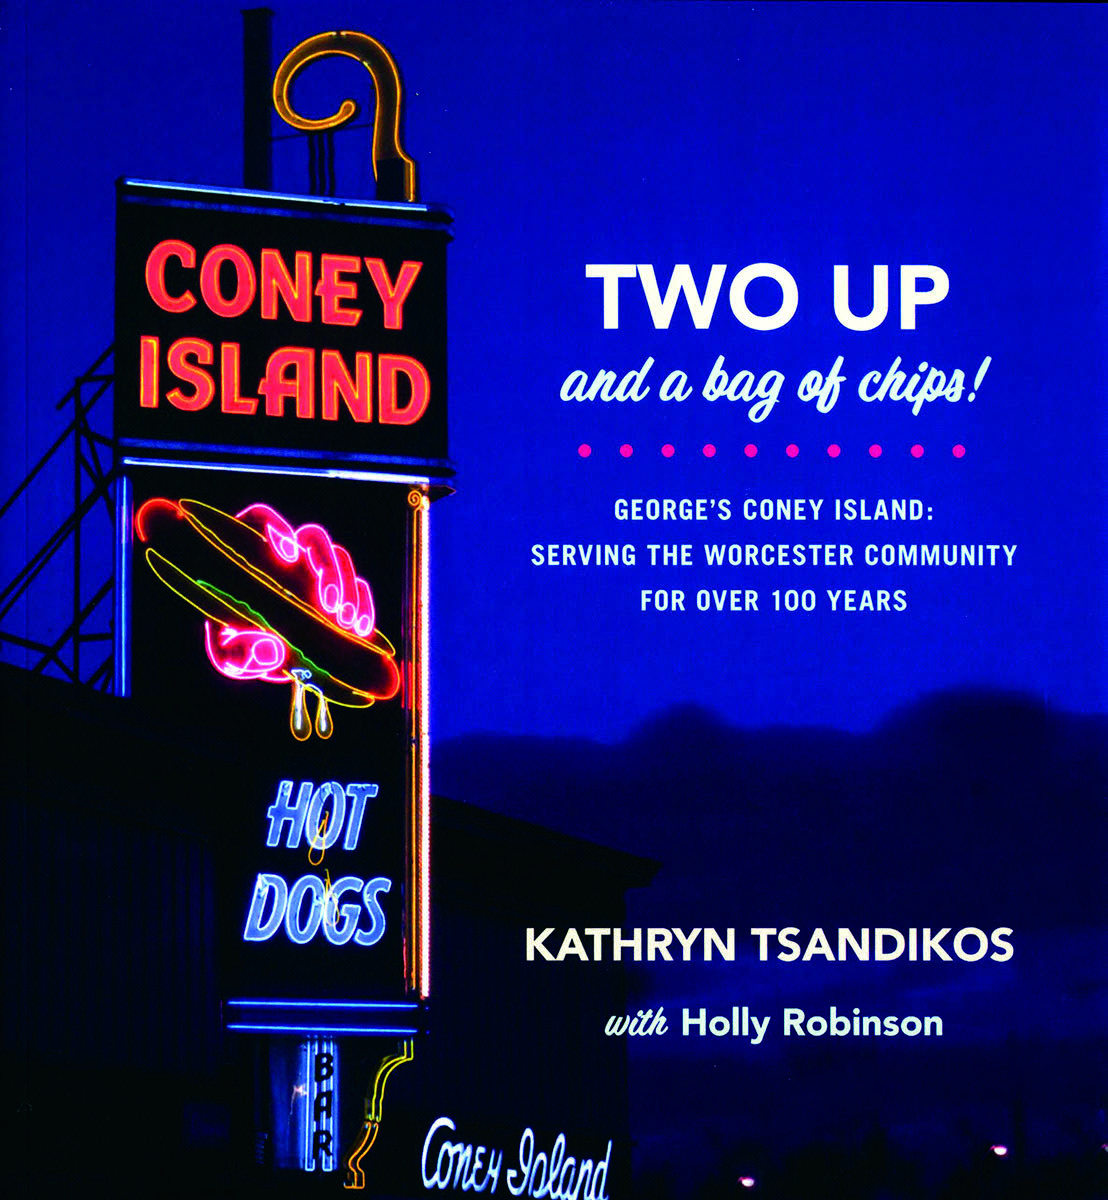 Two Up and a Bag of Chips! George’s Coney Island: Serving the Worcester Community for Over 100 Years book cover 